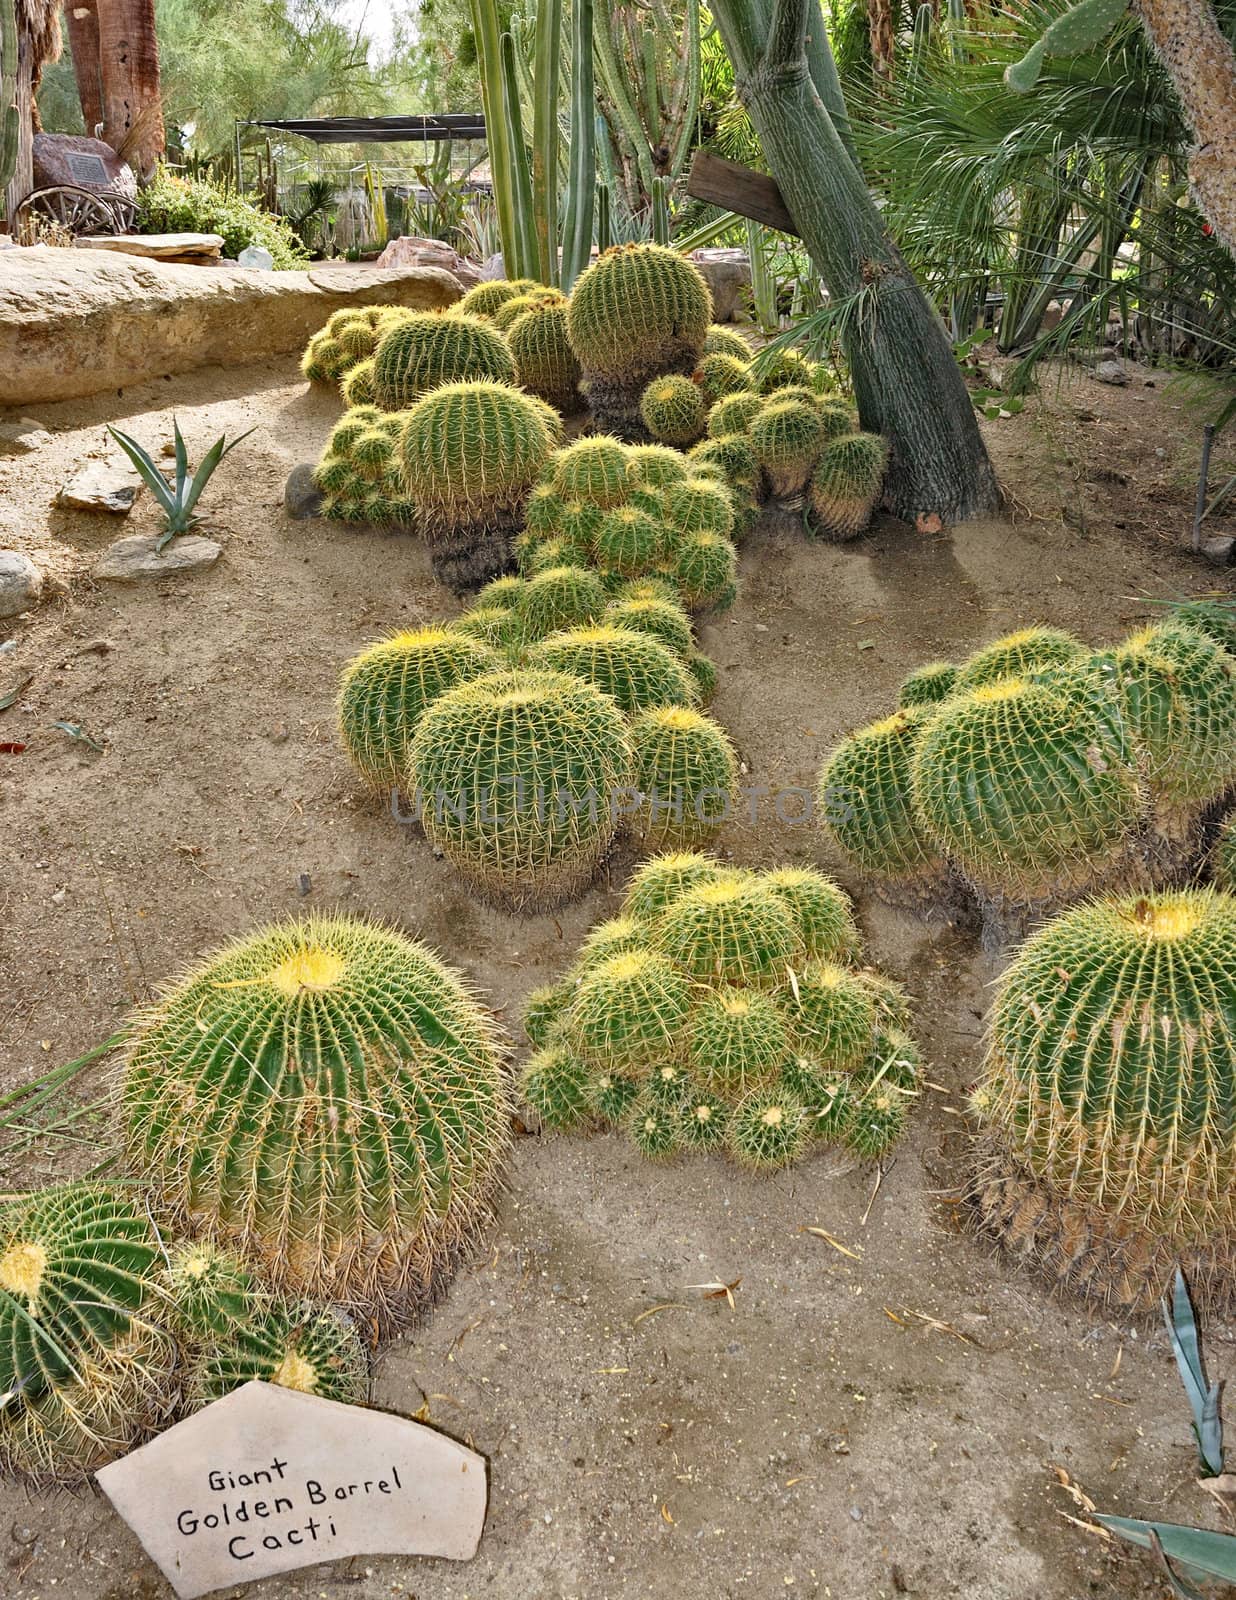 Group of giant golden barrel cacti on the hill.